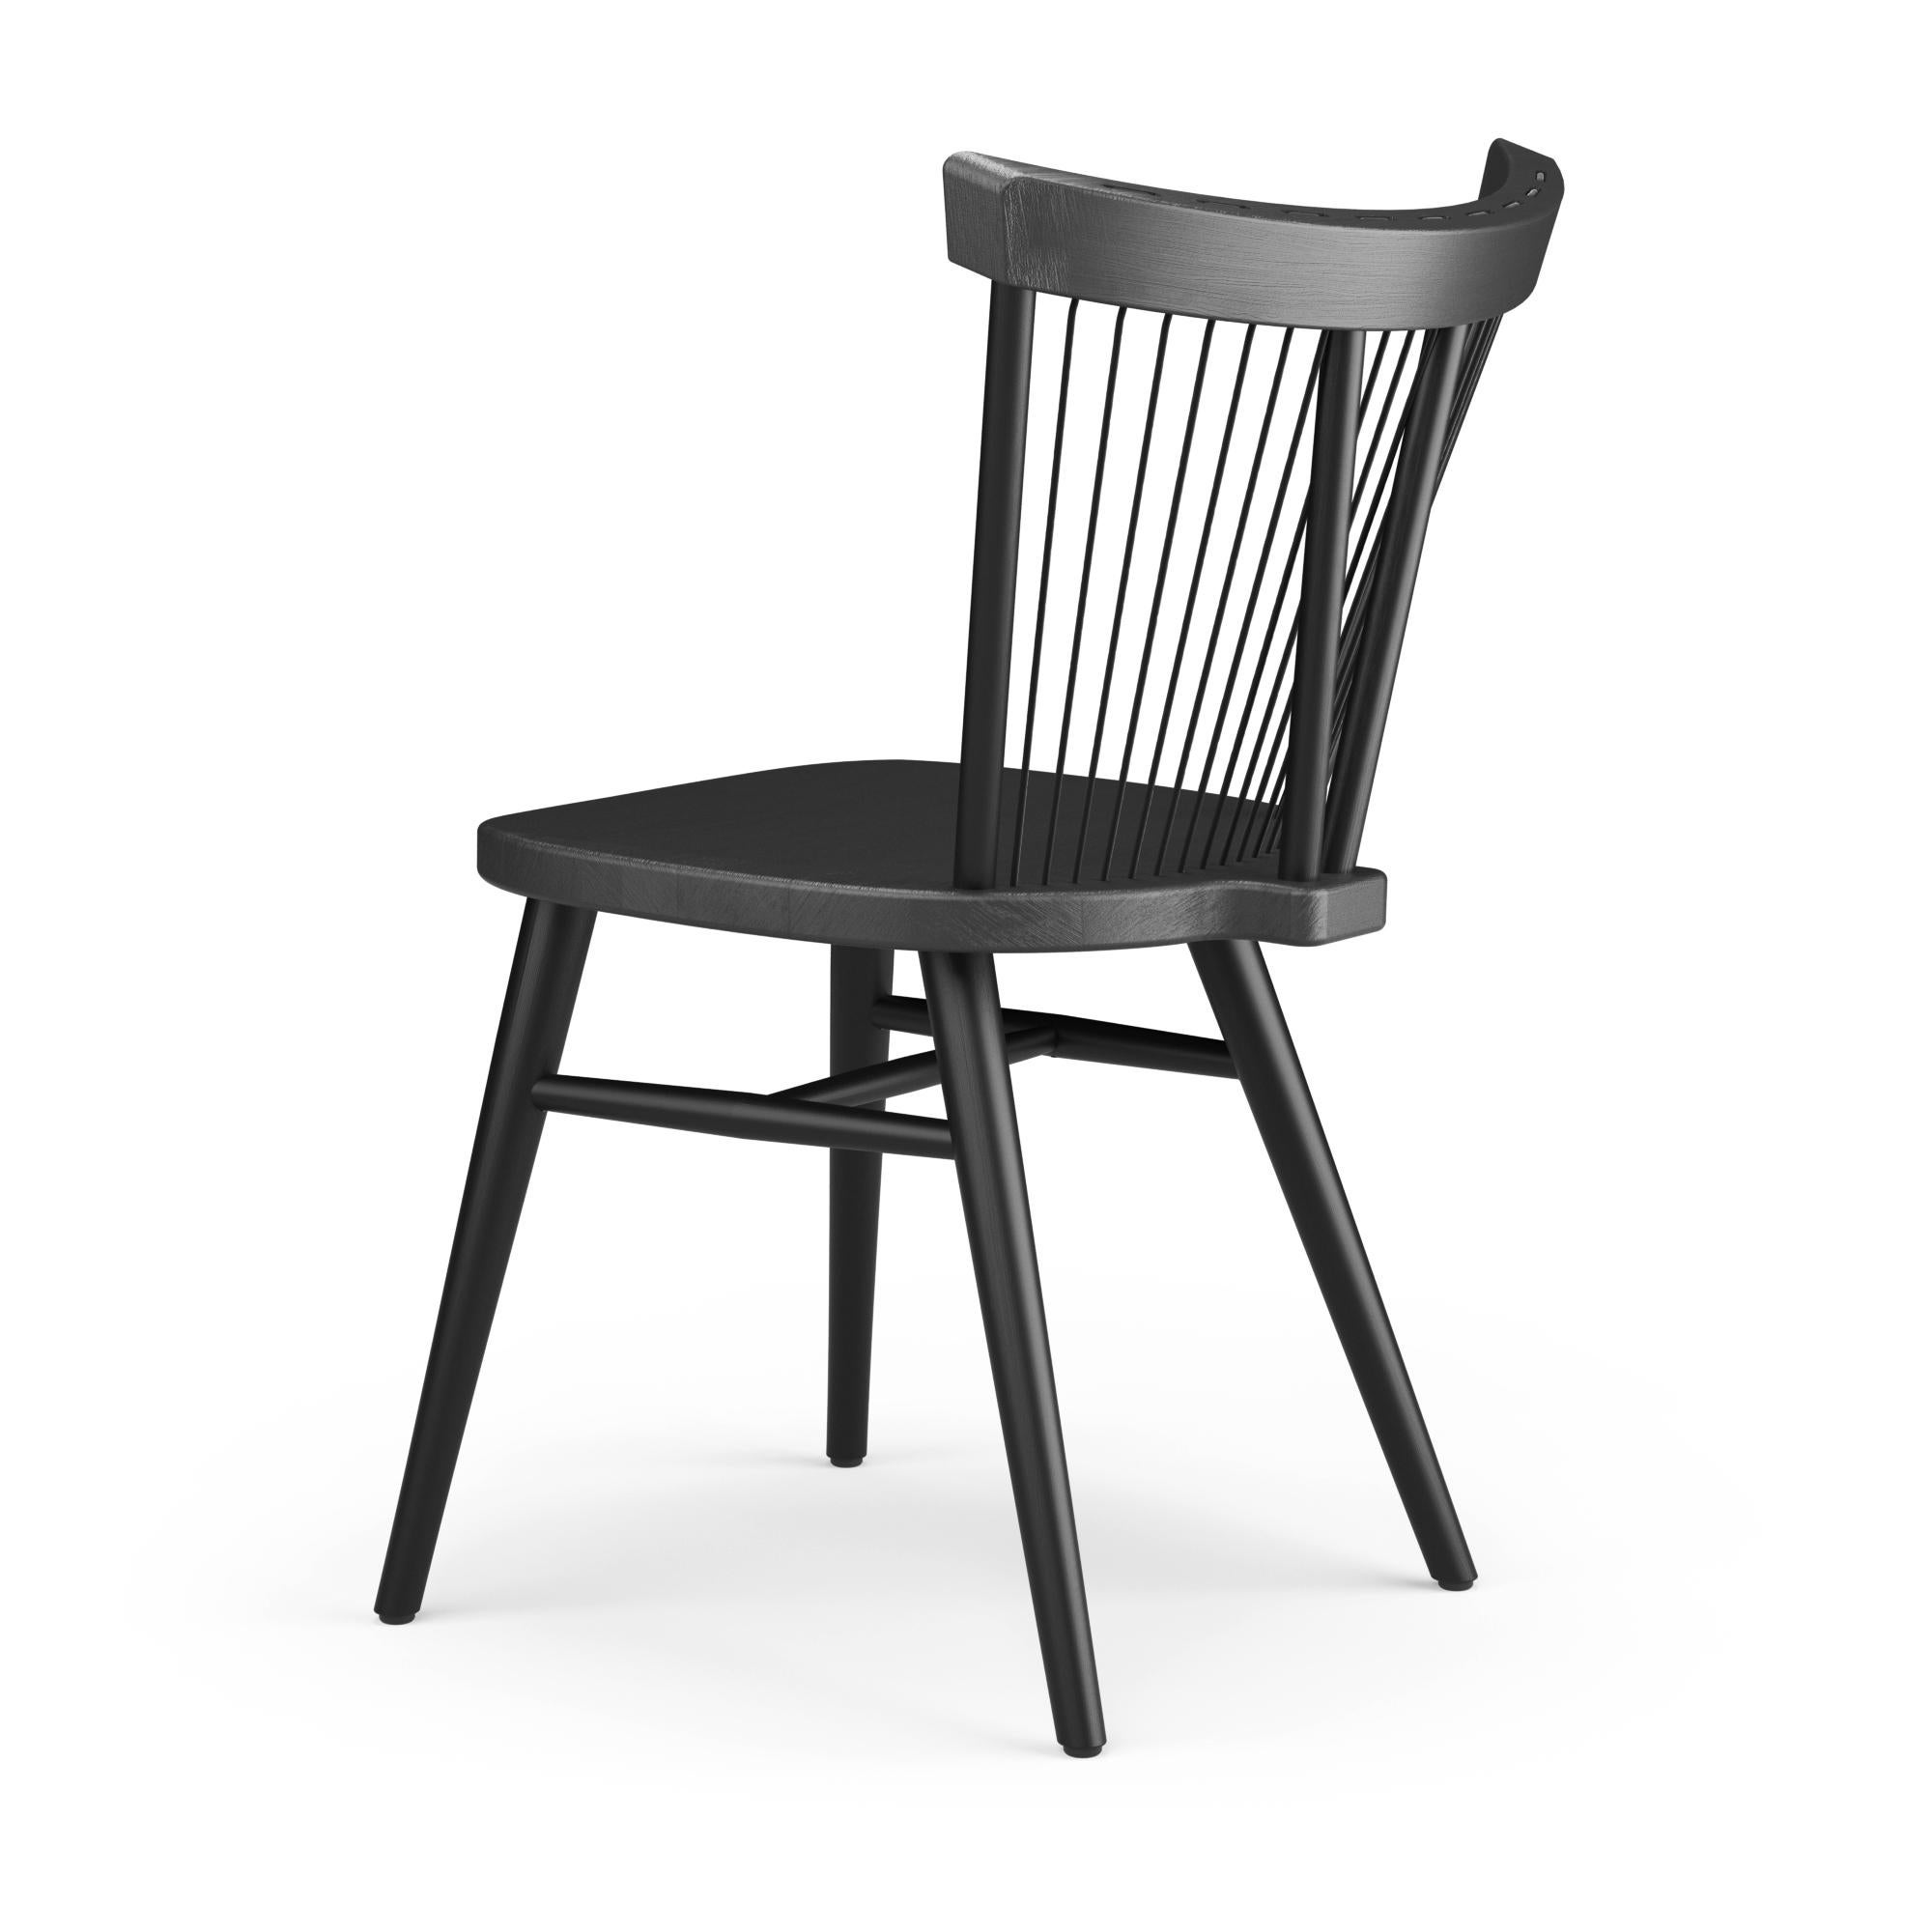 Mexican Hayche Cuerdas chair, Black, UK, Made To Order For Sale